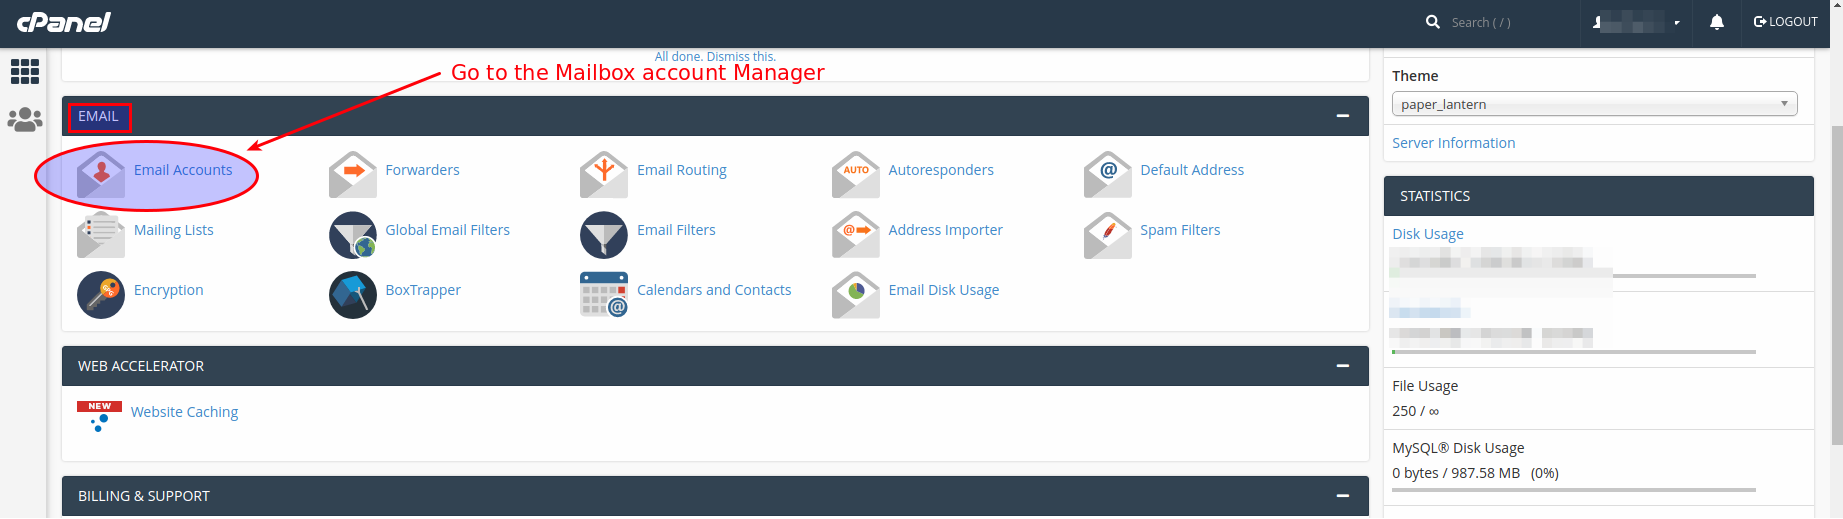 Access the email account manager to create, edit and delete.